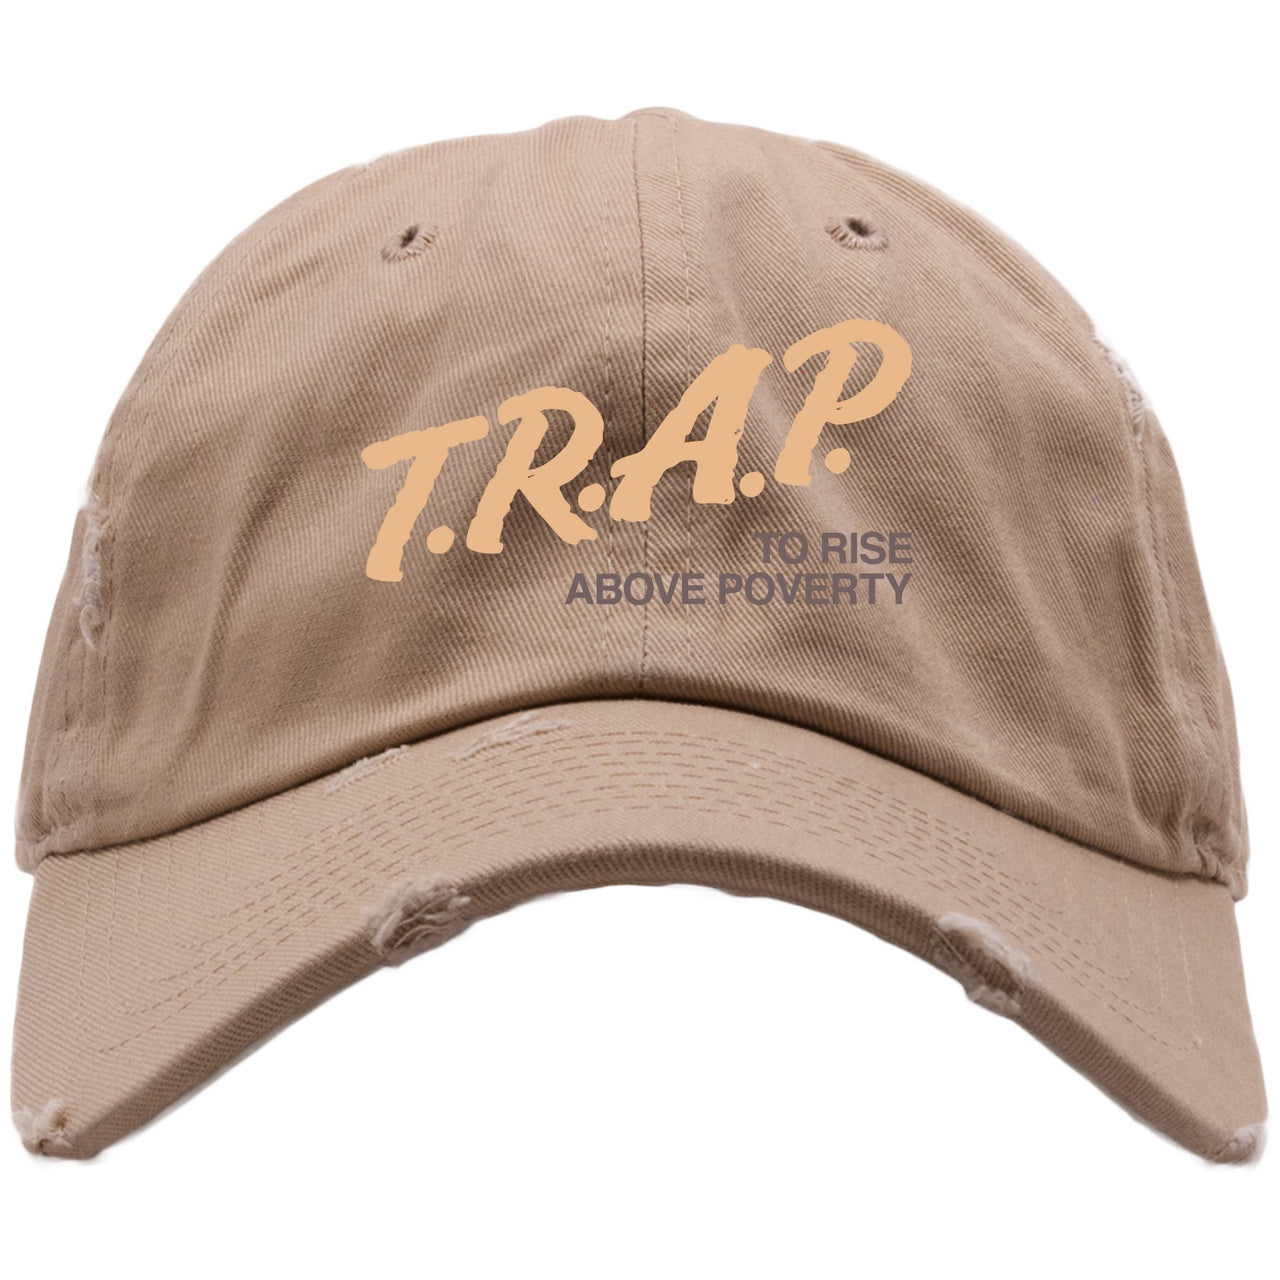 Clay v2 350s Distressed Dad Hat | Trap To Rise Above Poverty, Khaki